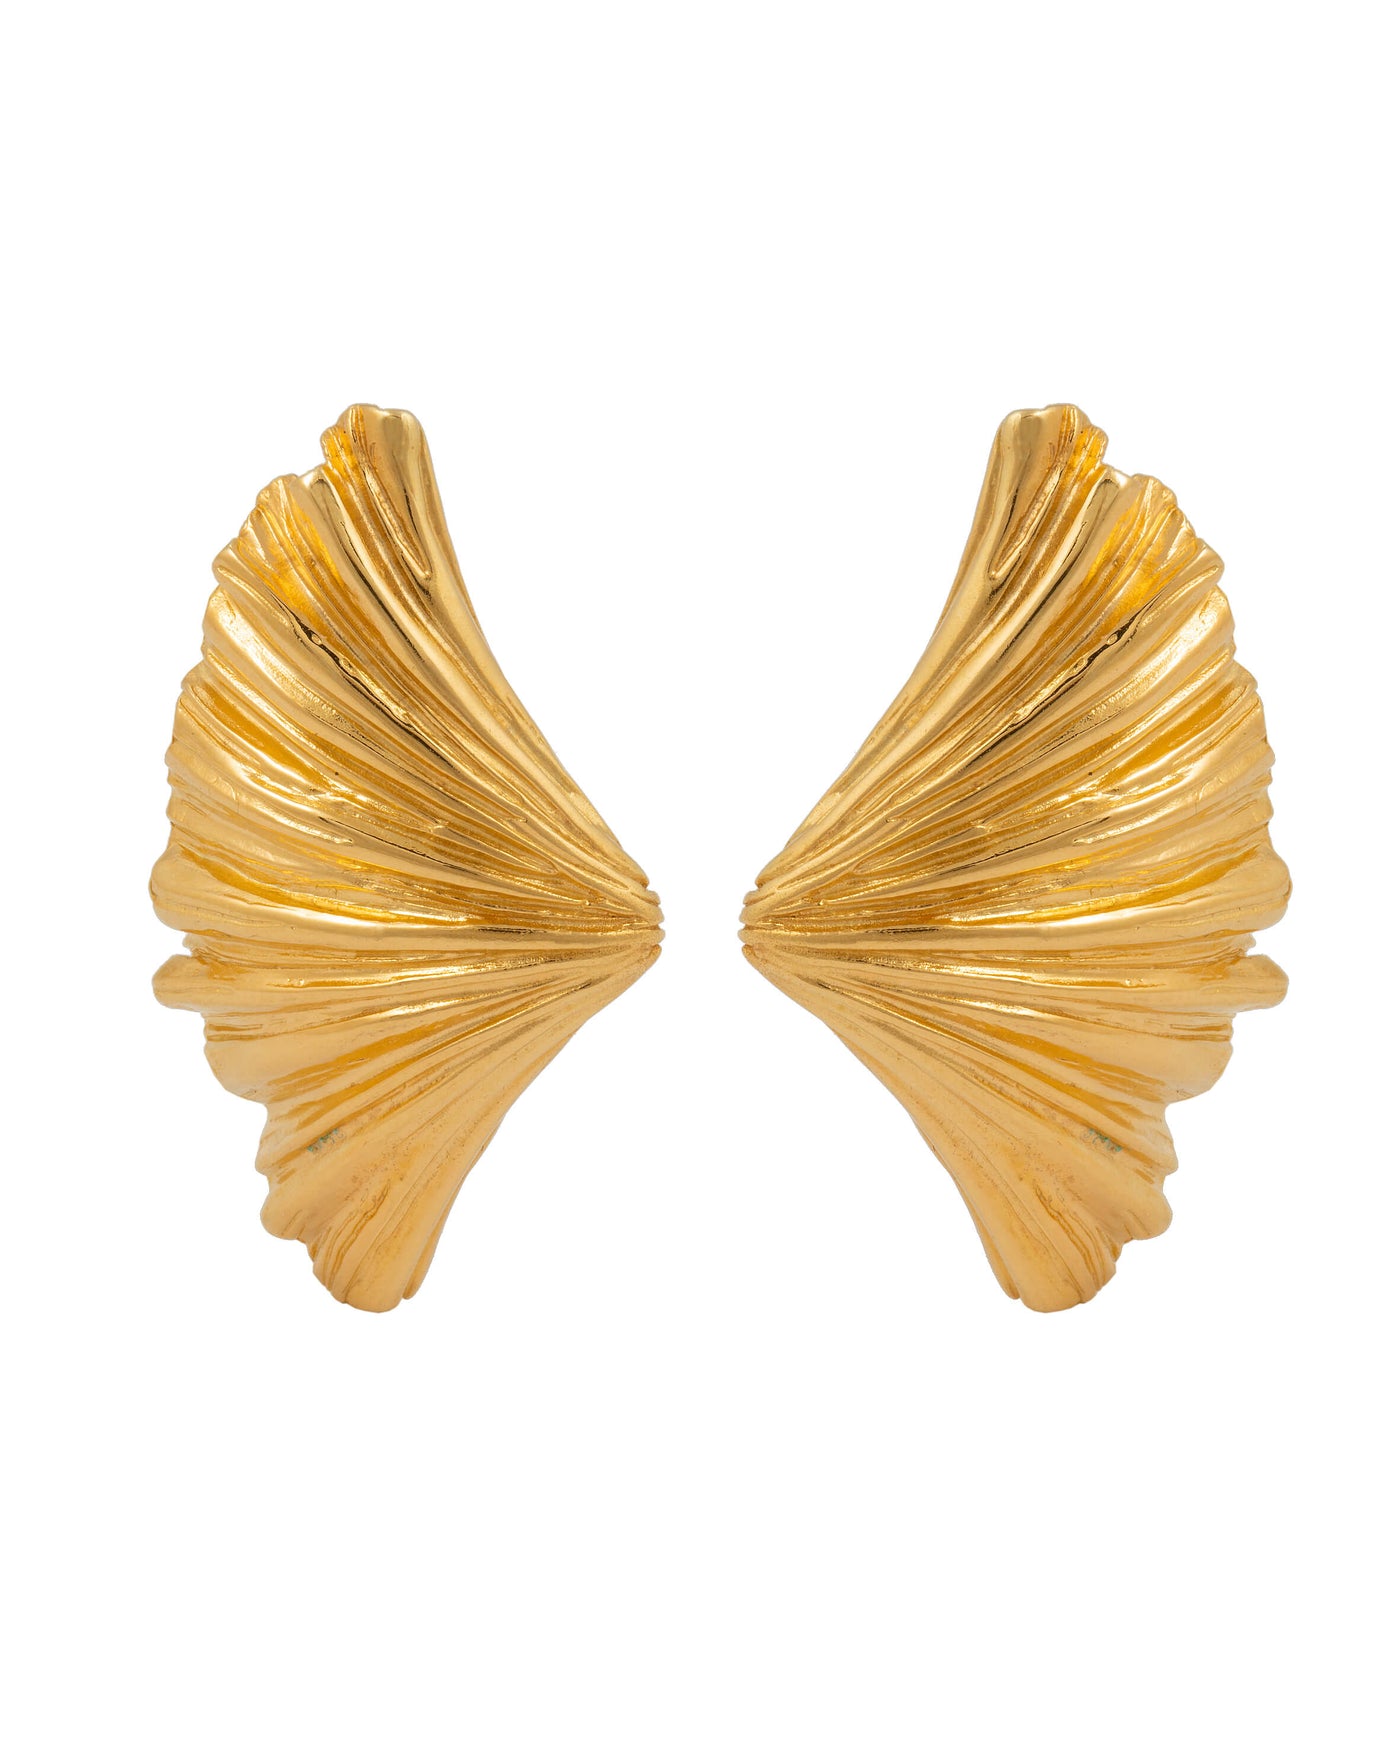 Solid gold Large Shell Earrings